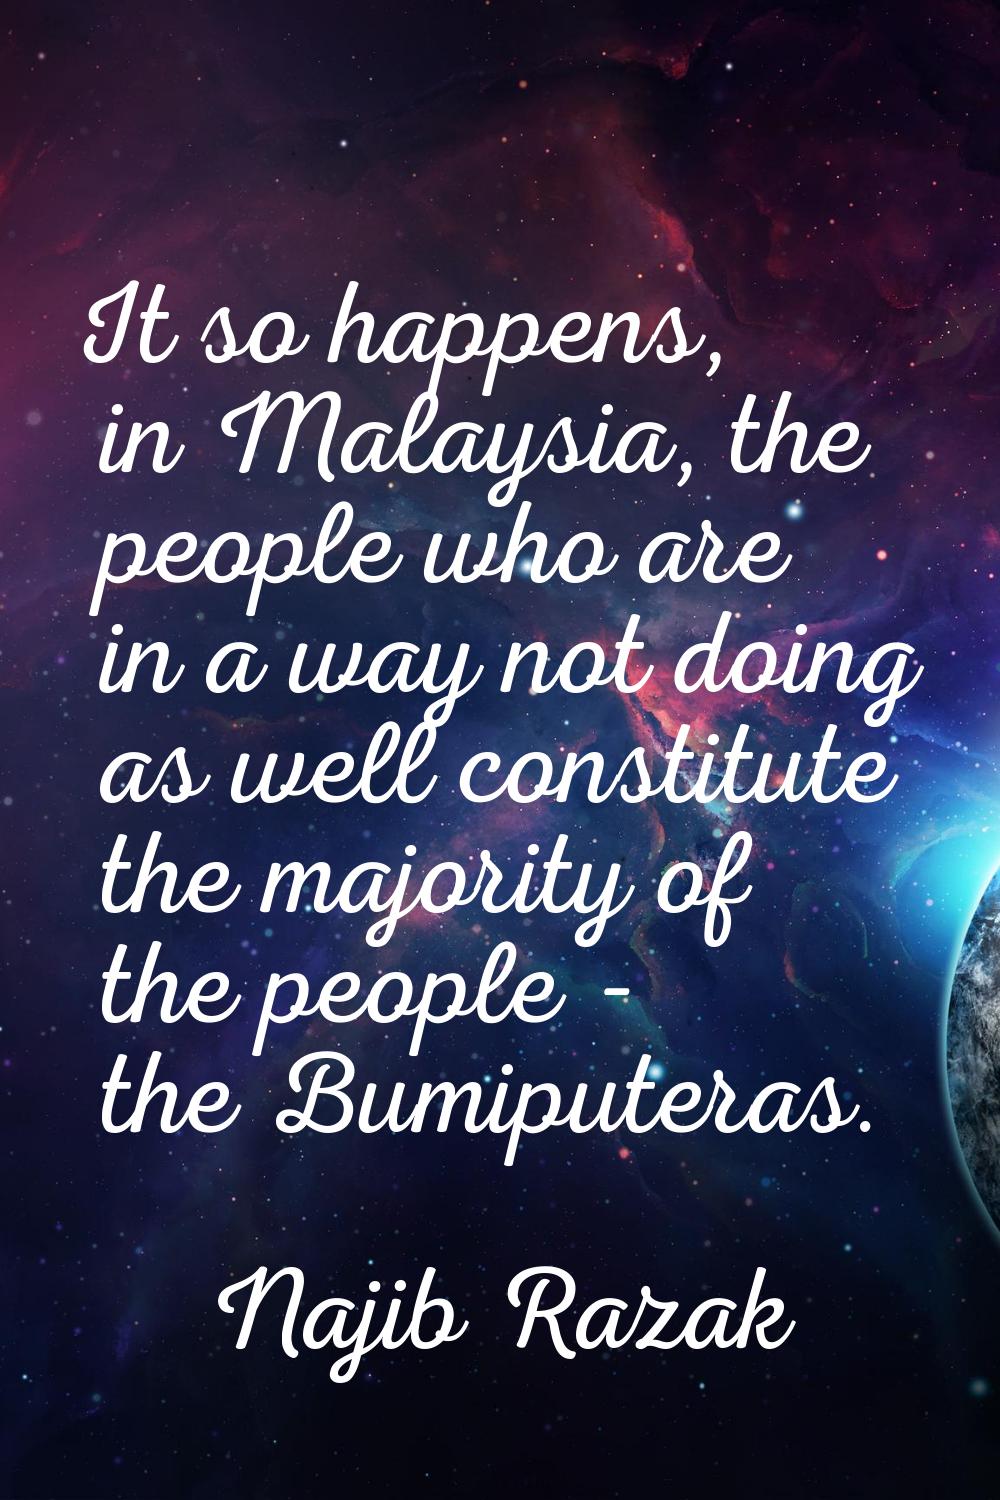 It so happens, in Malaysia, the people who are in a way not doing as well constitute the majority o